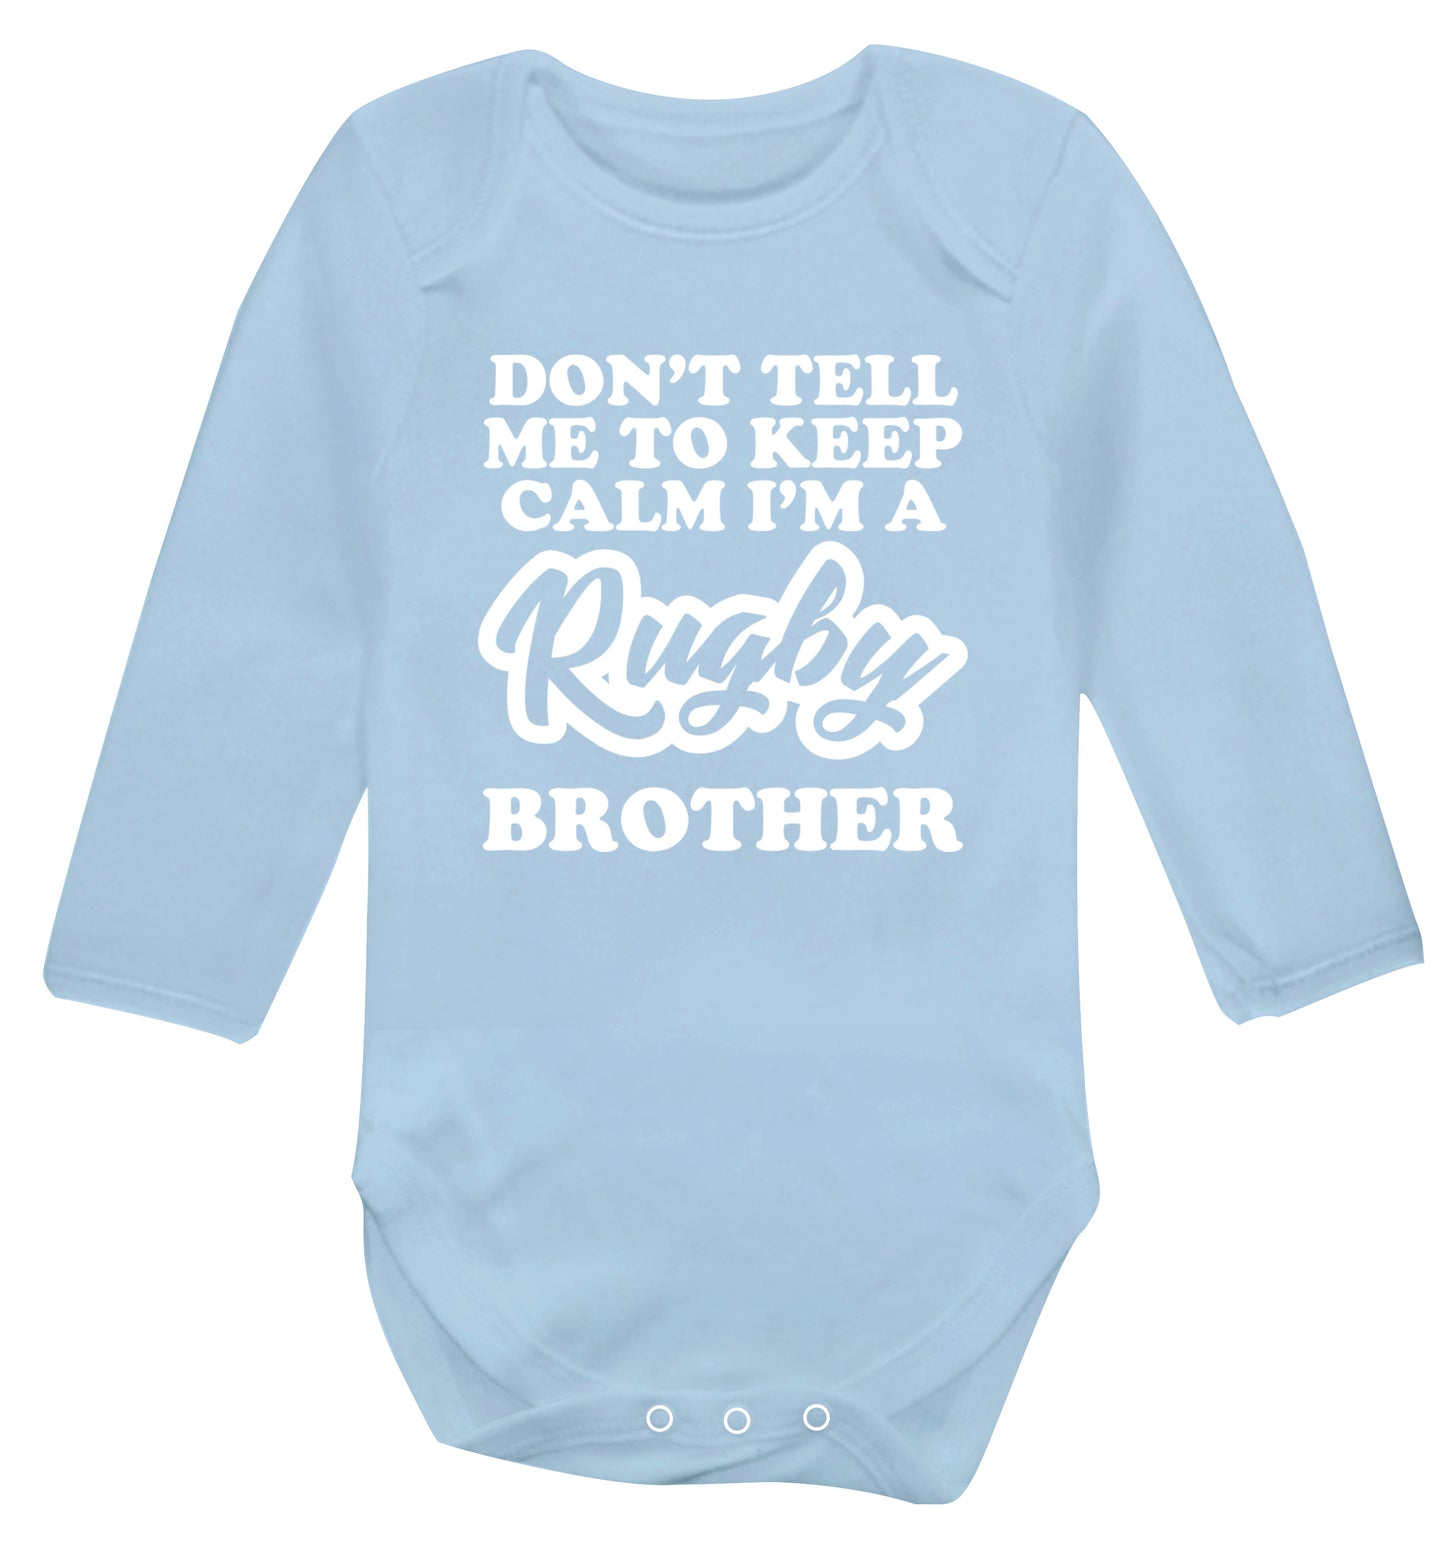 Don't tell me keep calm I'm a rugby brother Baby Vest long sleeved pale blue 6-12 months